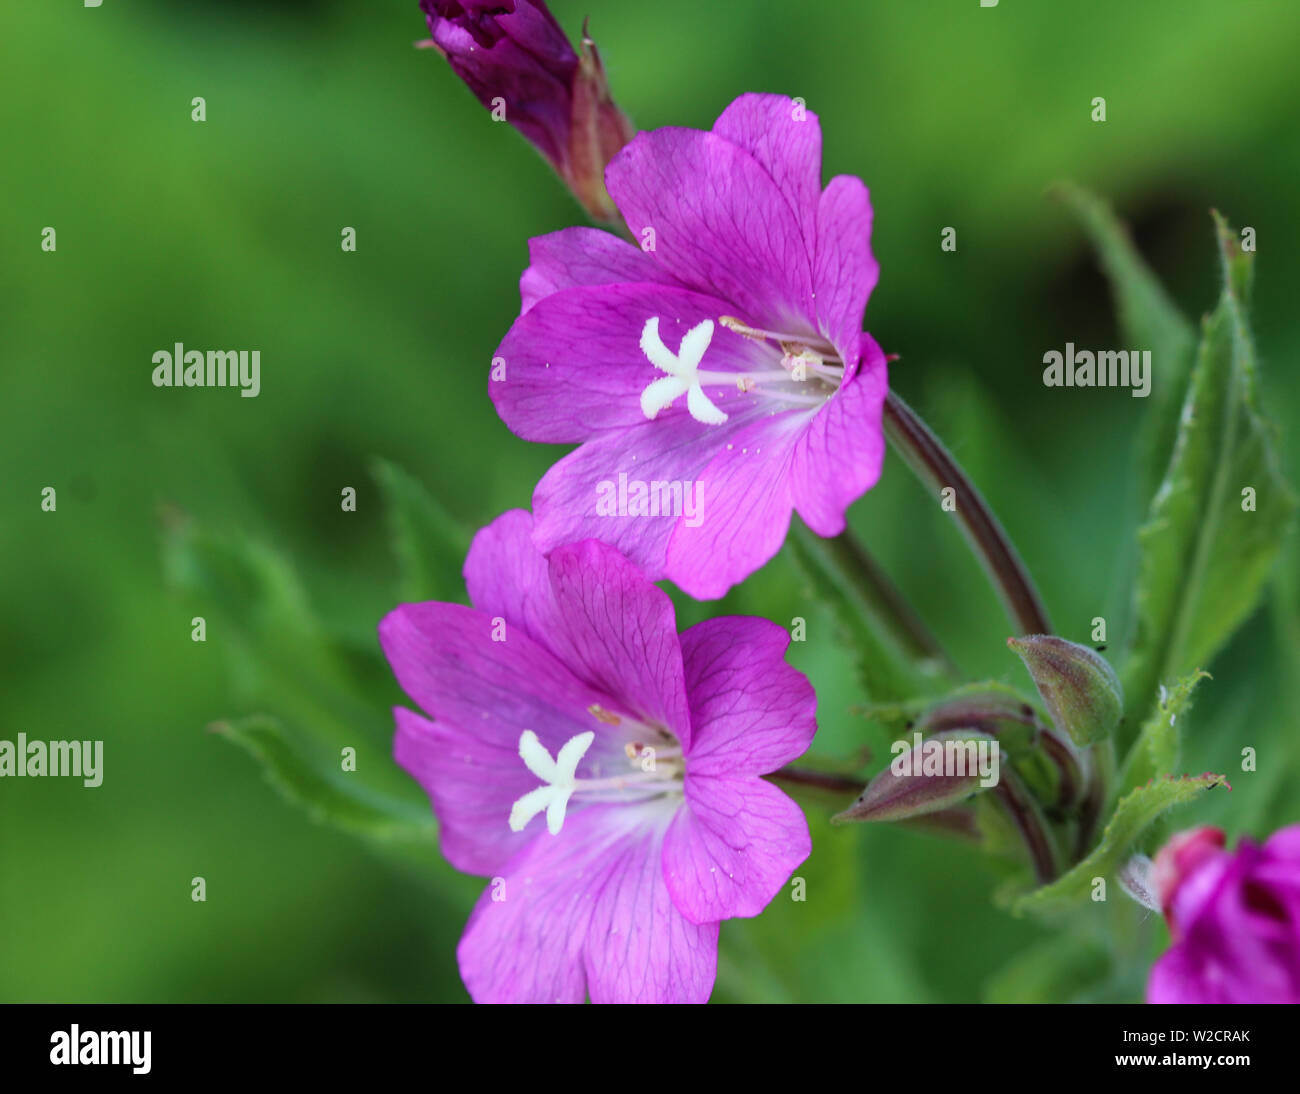 close up of Epilobium hirsutum, commonly known as the great willowherb, great hairy willowherb or hairy willowherb, blooming in forest Stock Photo